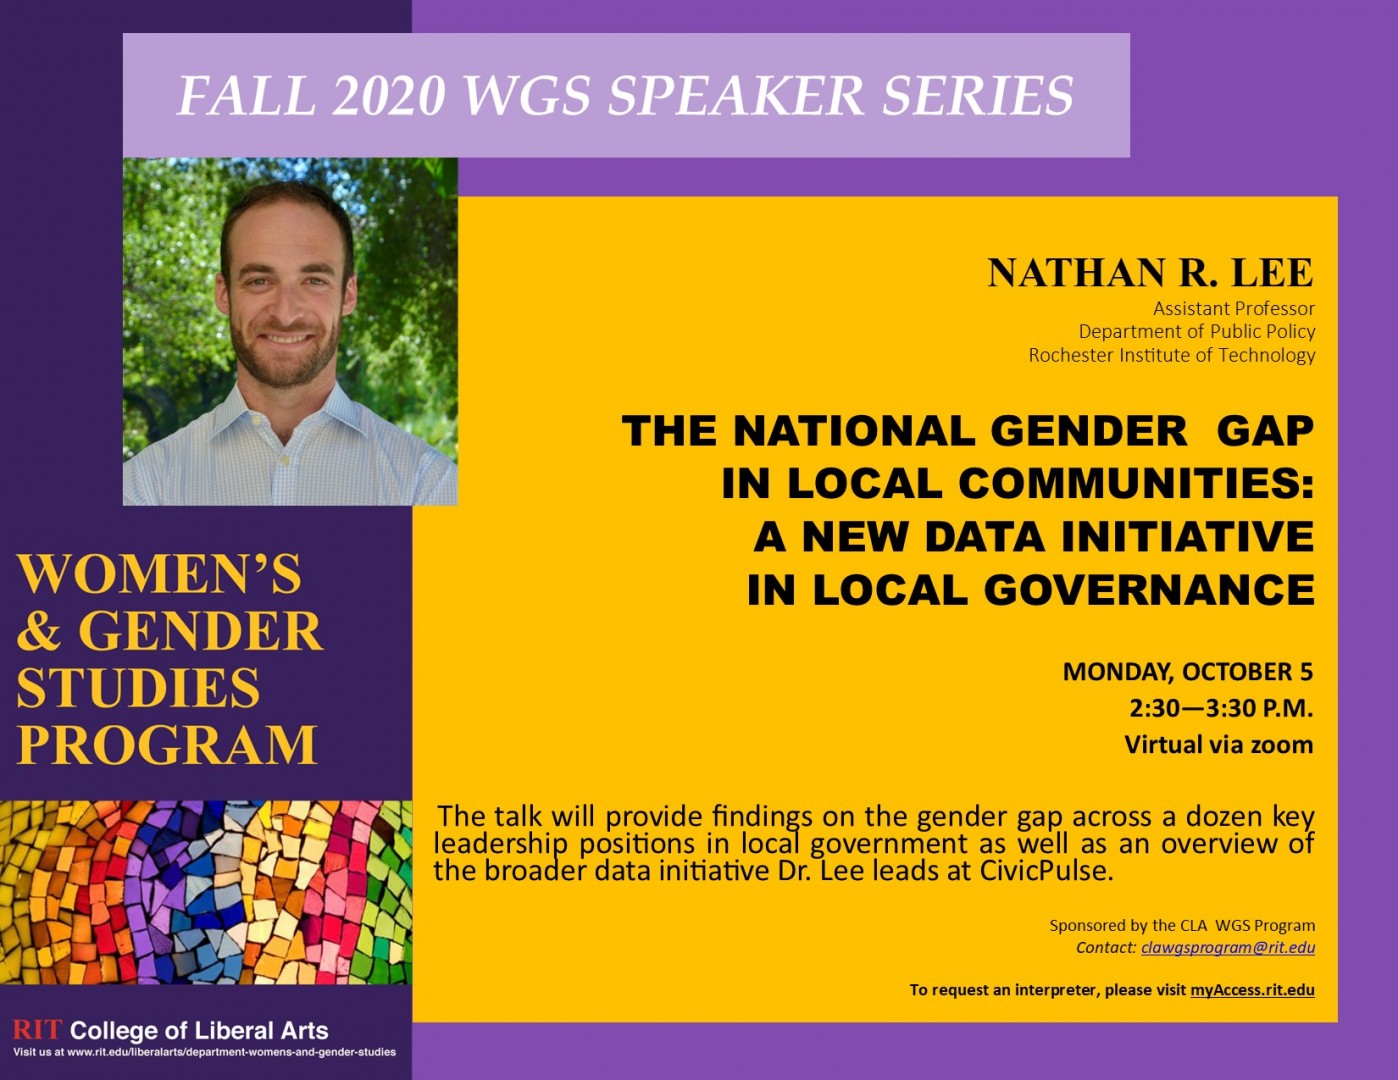 <strong>NATHAN R. LEE</strong> Assistant Professor  Department of Public Policy Rochester Institute of Technology   <strong>THE NATIONAL GENDER  GAP  IN LOCAL COMMUNITIES: A NEW DATA INITIATIVE  IN LOCAL GOVERNANCE</strong>  <strong>MONDAY, OCTOBER 5 2:30—3:30 P.M.</strong> Virtual via zoom